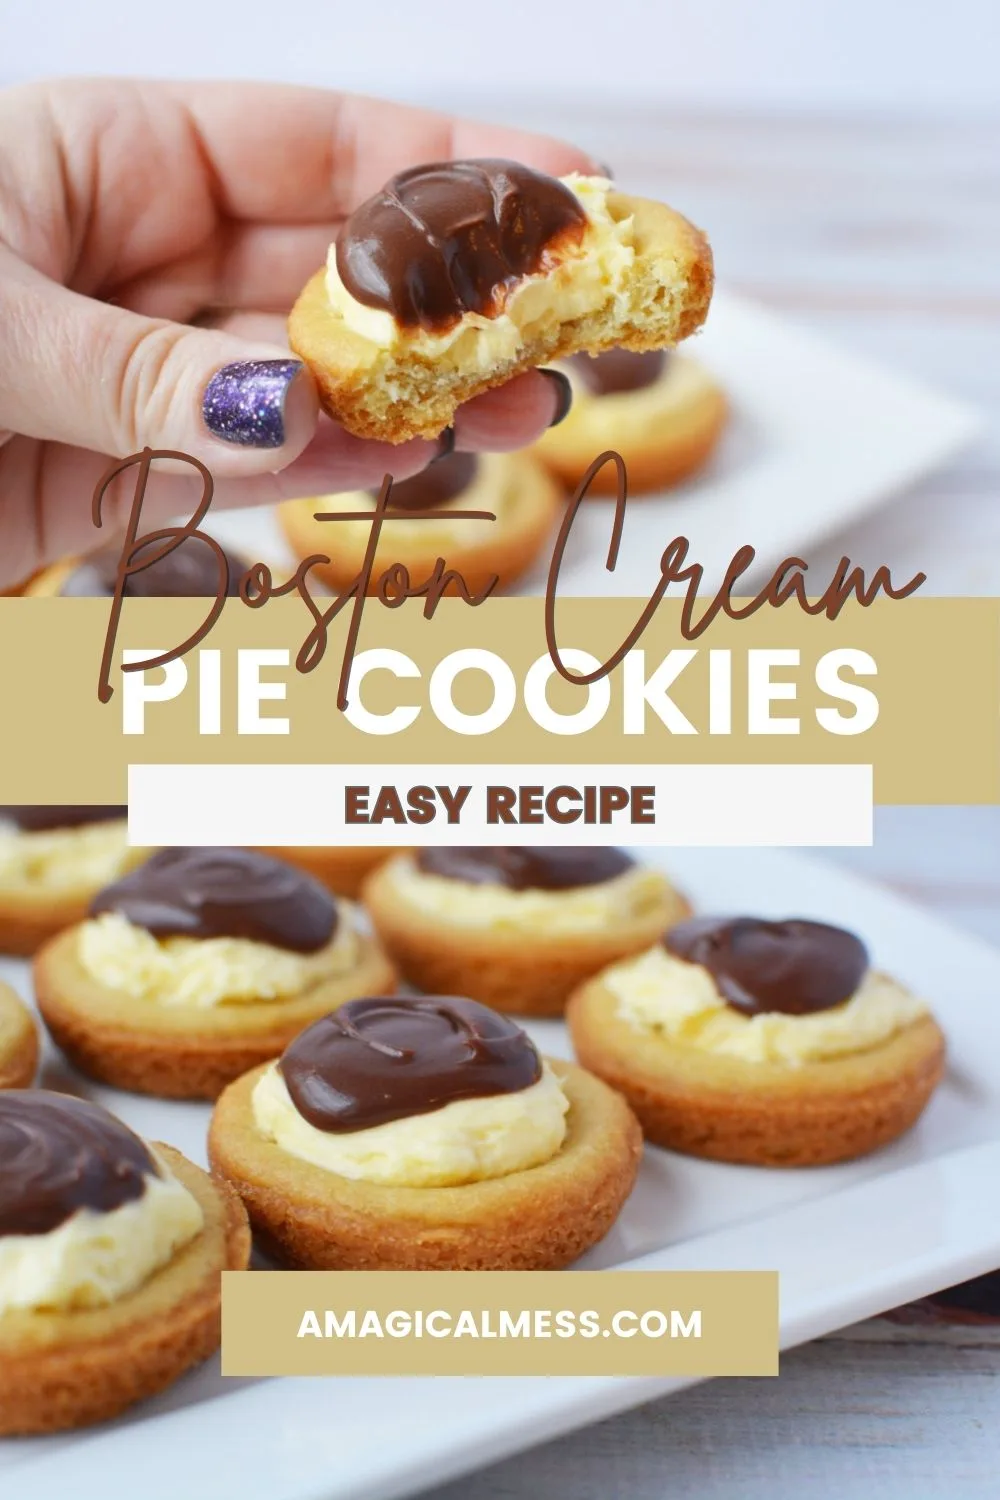 Quick and Easy Boston Cream Pie Cookies Recipe | A Magical Mess